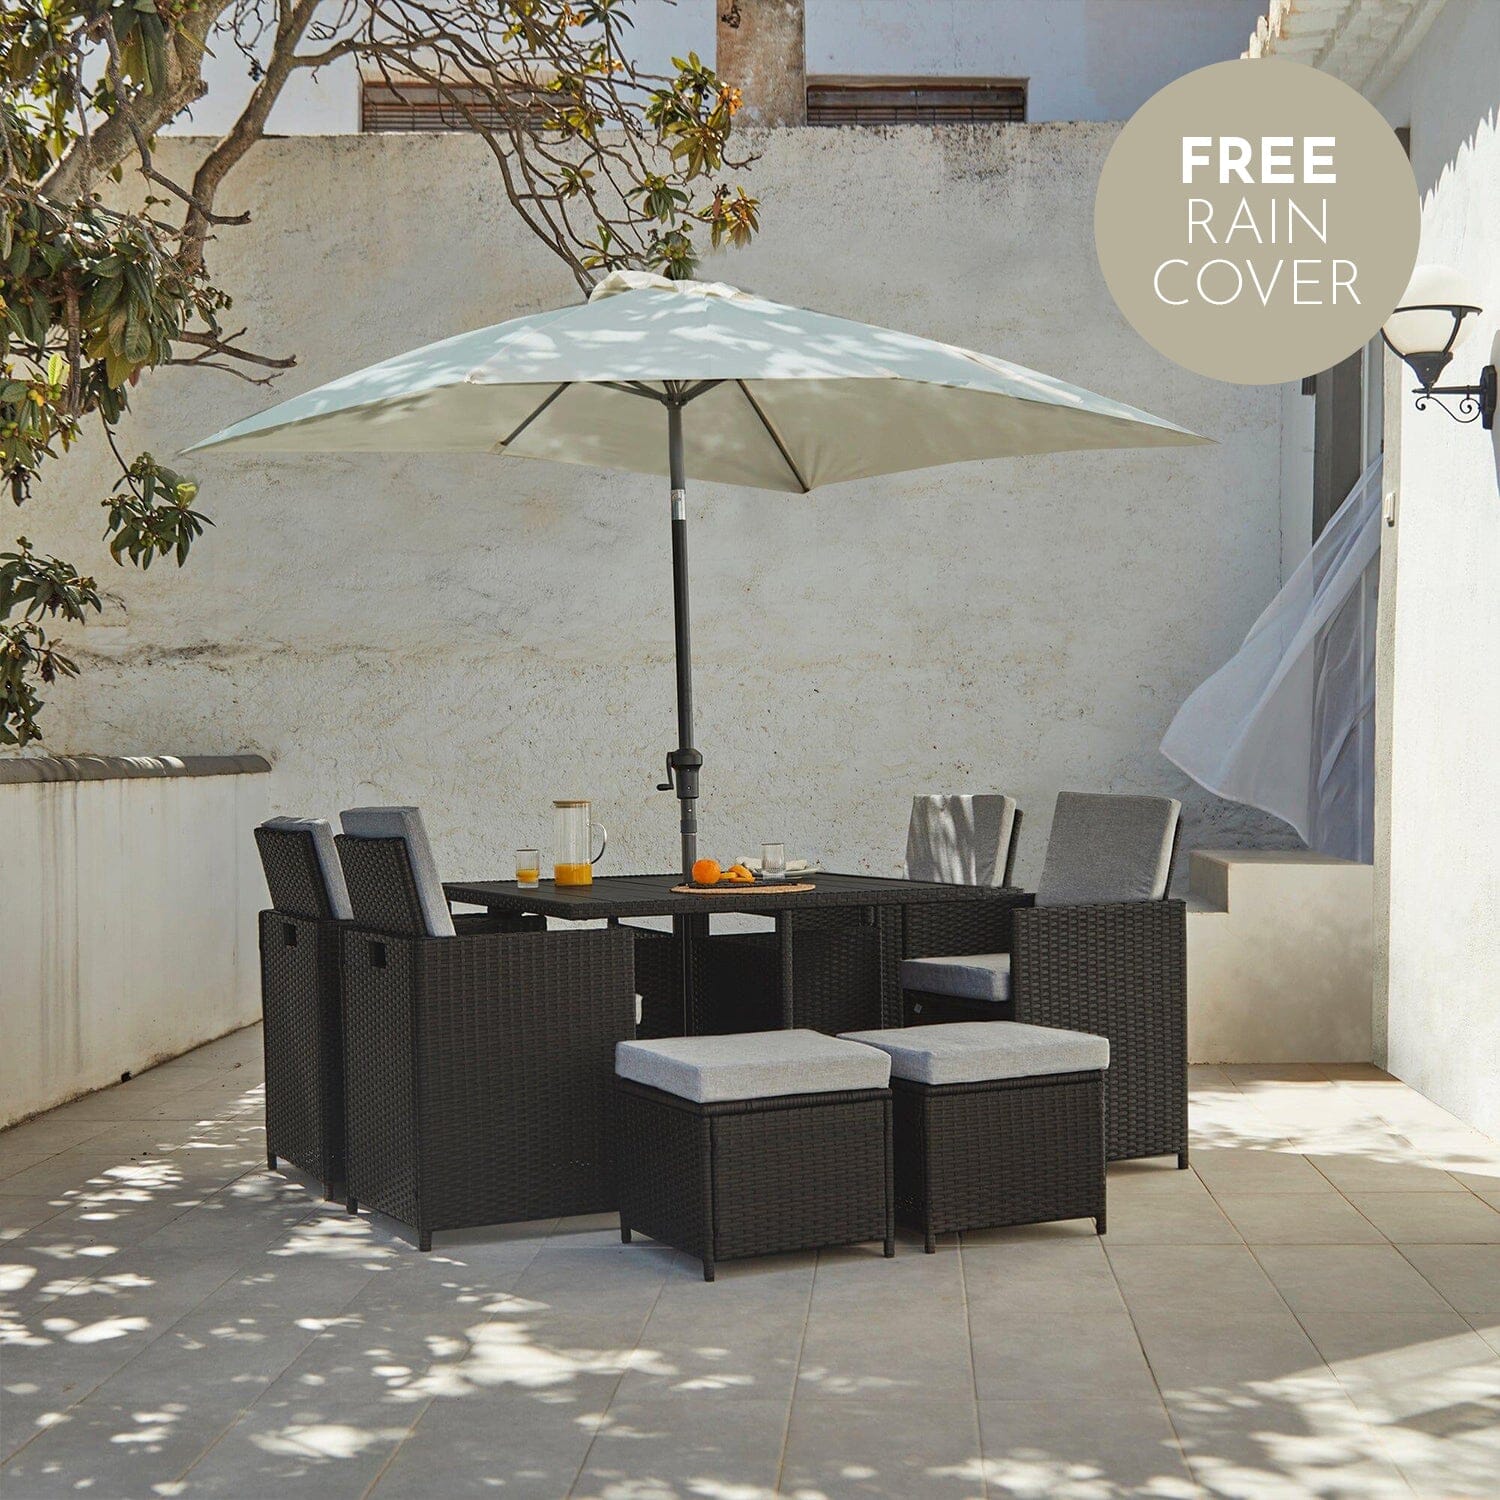 8 Seater Rattan Cube Outdoor Dining Set with Cream Parasol - Black Weave Polywood Top - Laura James